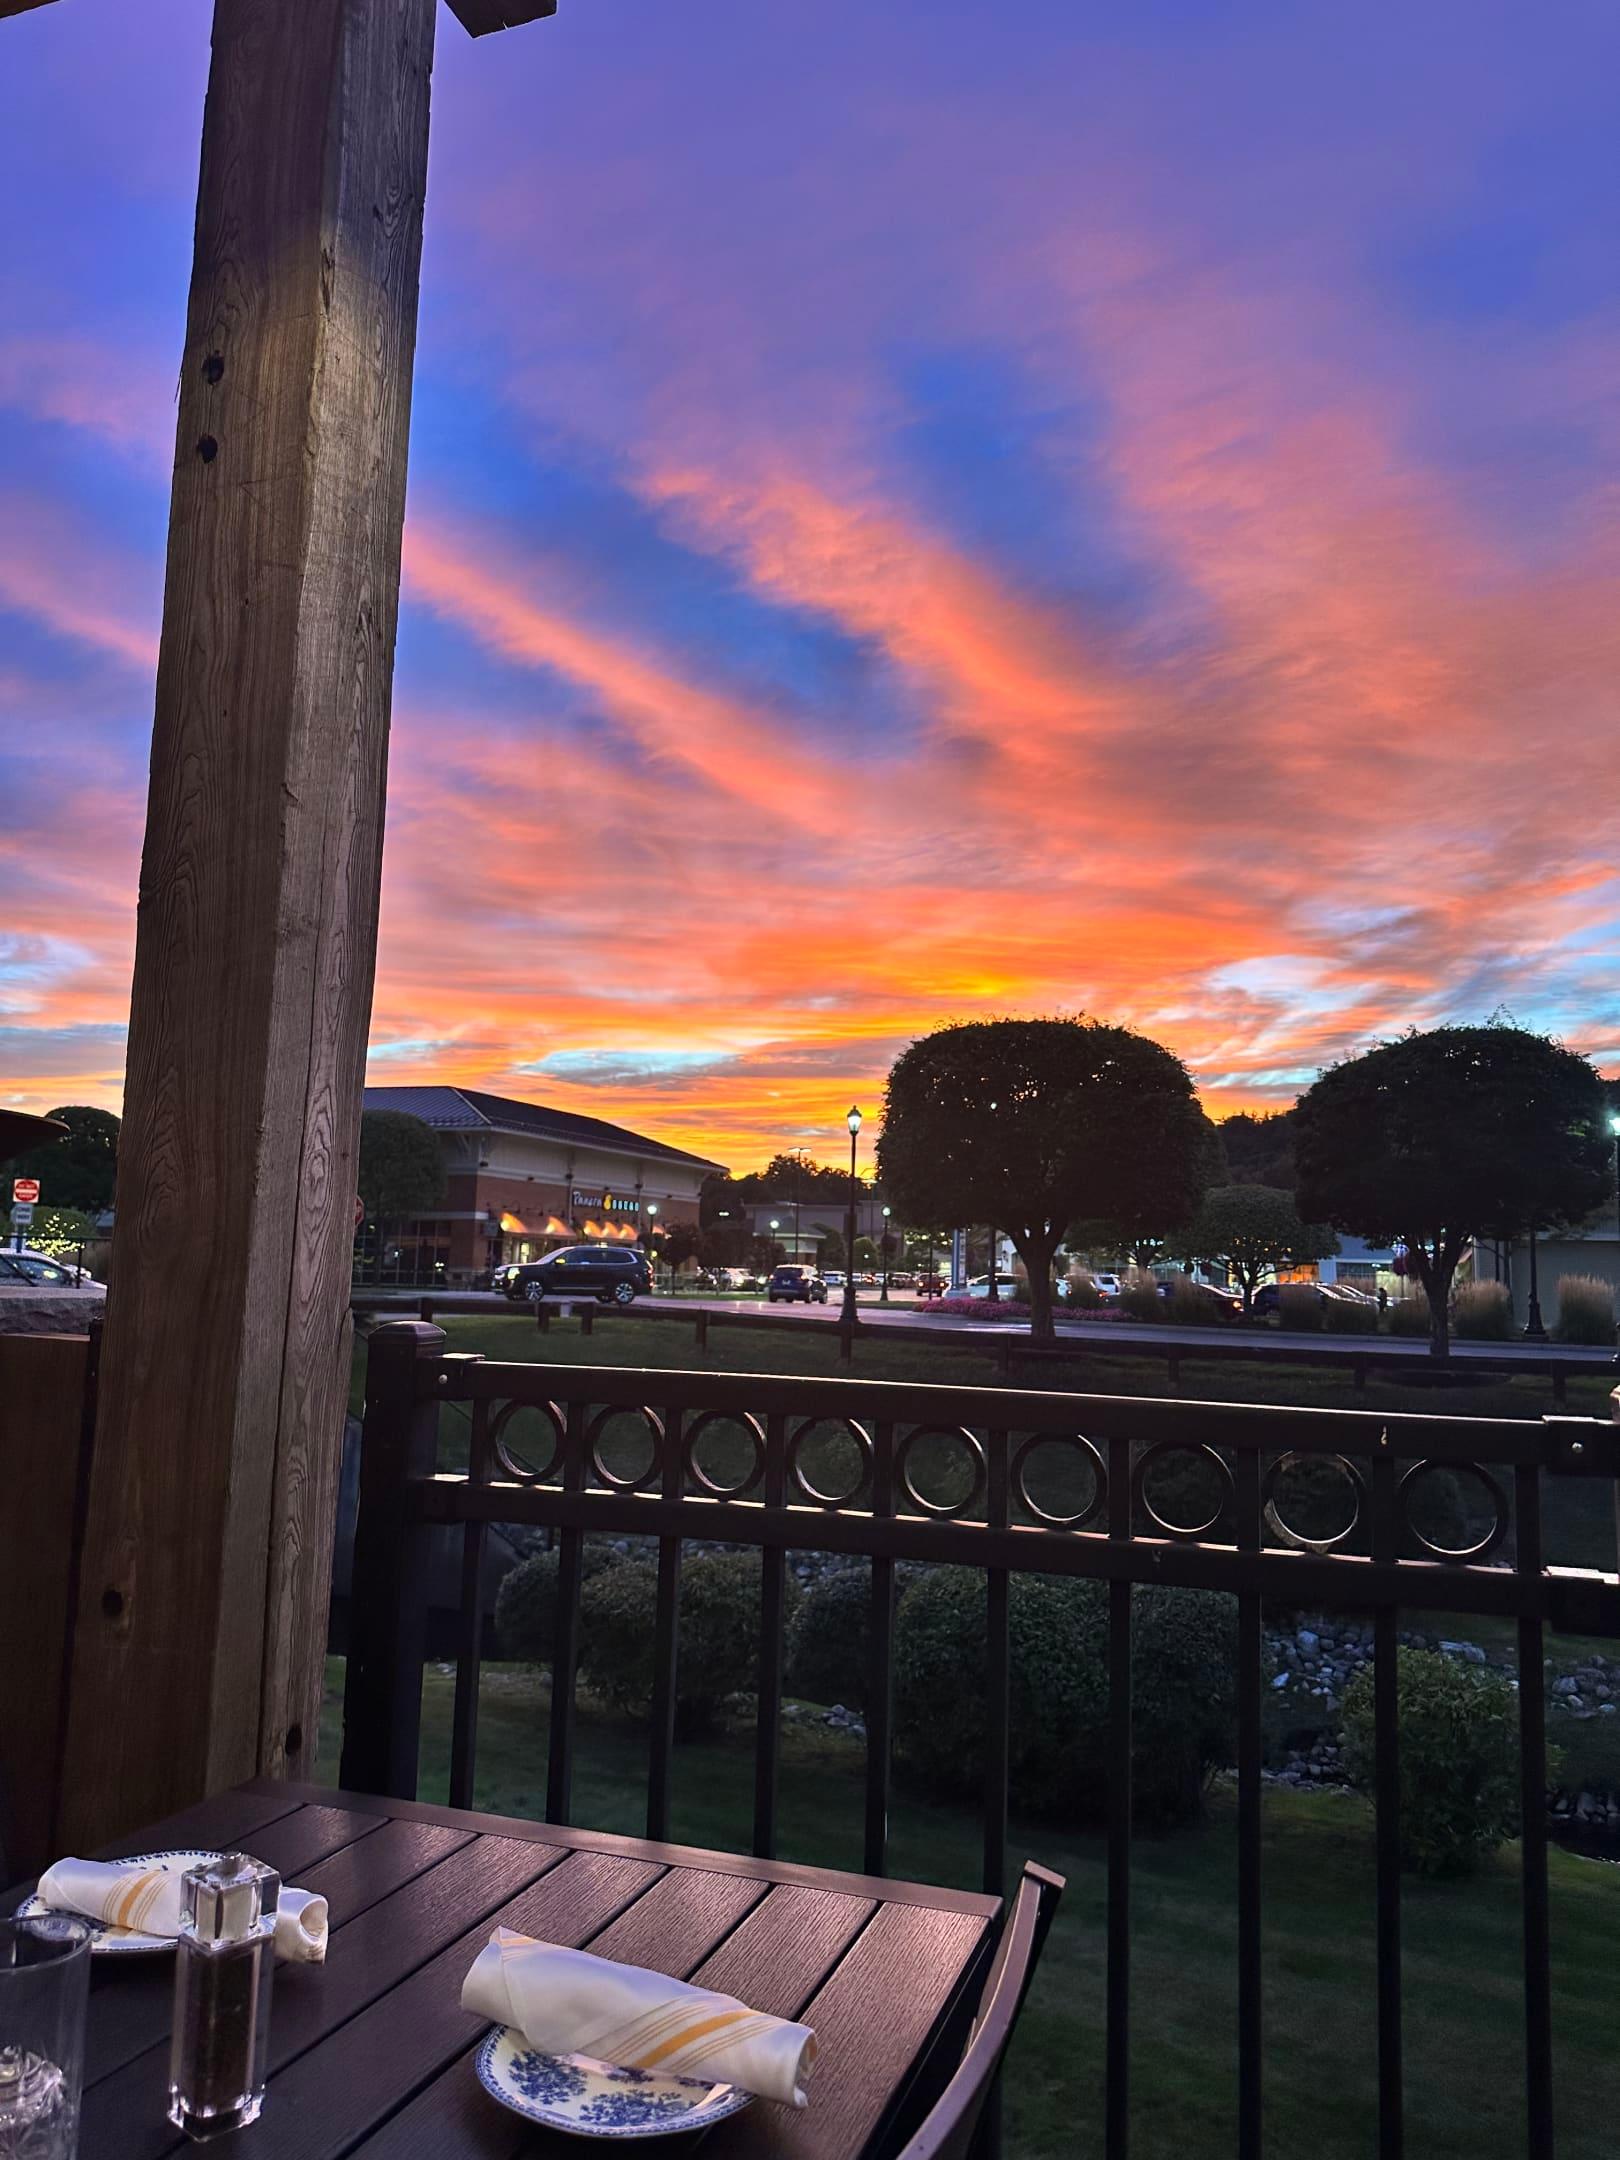 Beautiful Sunsets From The Patio!